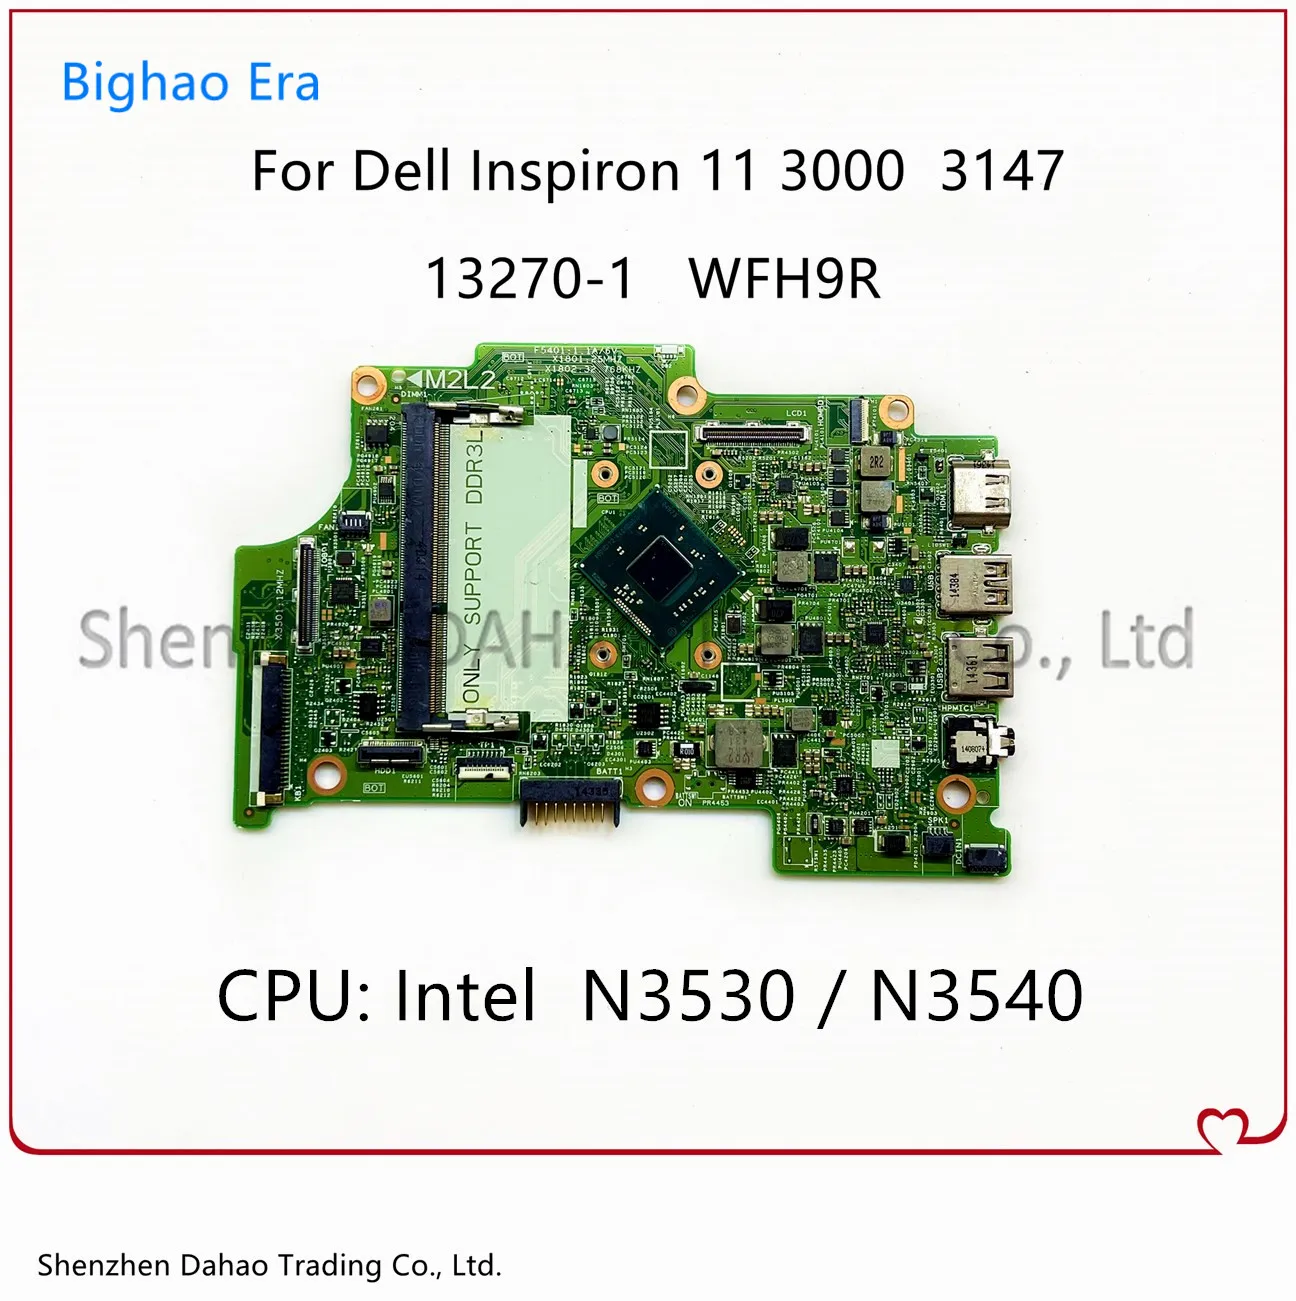 

For Dell Inspiron 11 3000 3147 Laptop Motherboard 13270-1 WFH9R Mainboard With N3530/N3540 CPU CN-01YRTP 0KW8RD 100% Fully Test